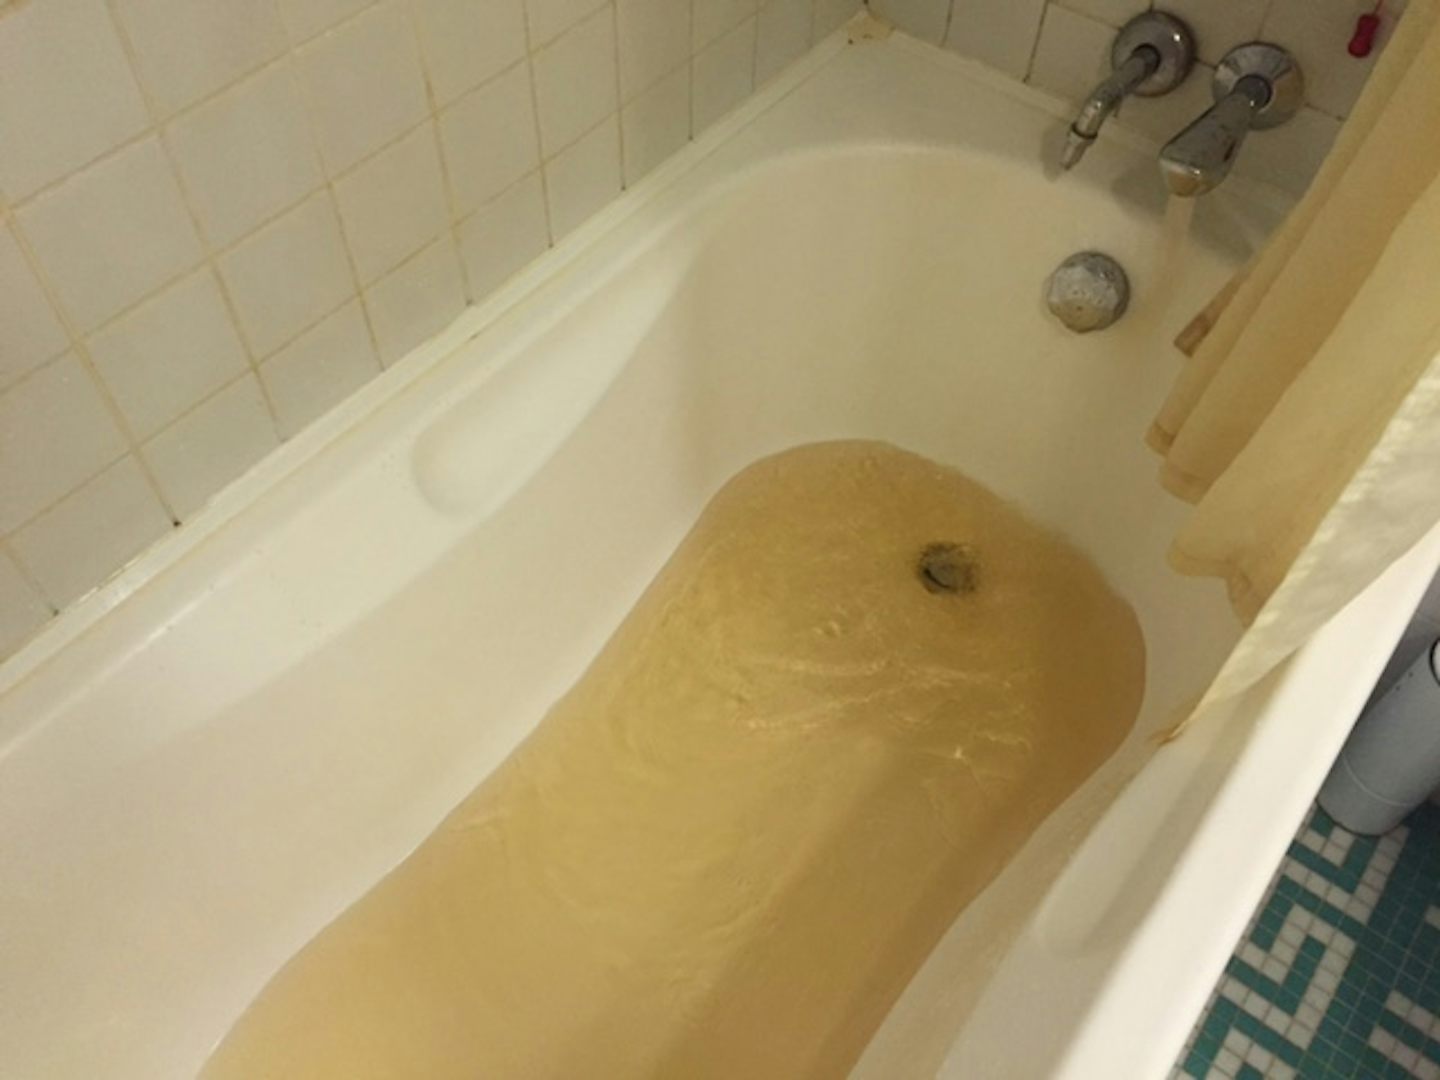 Our brown bath water coming out of the tap.